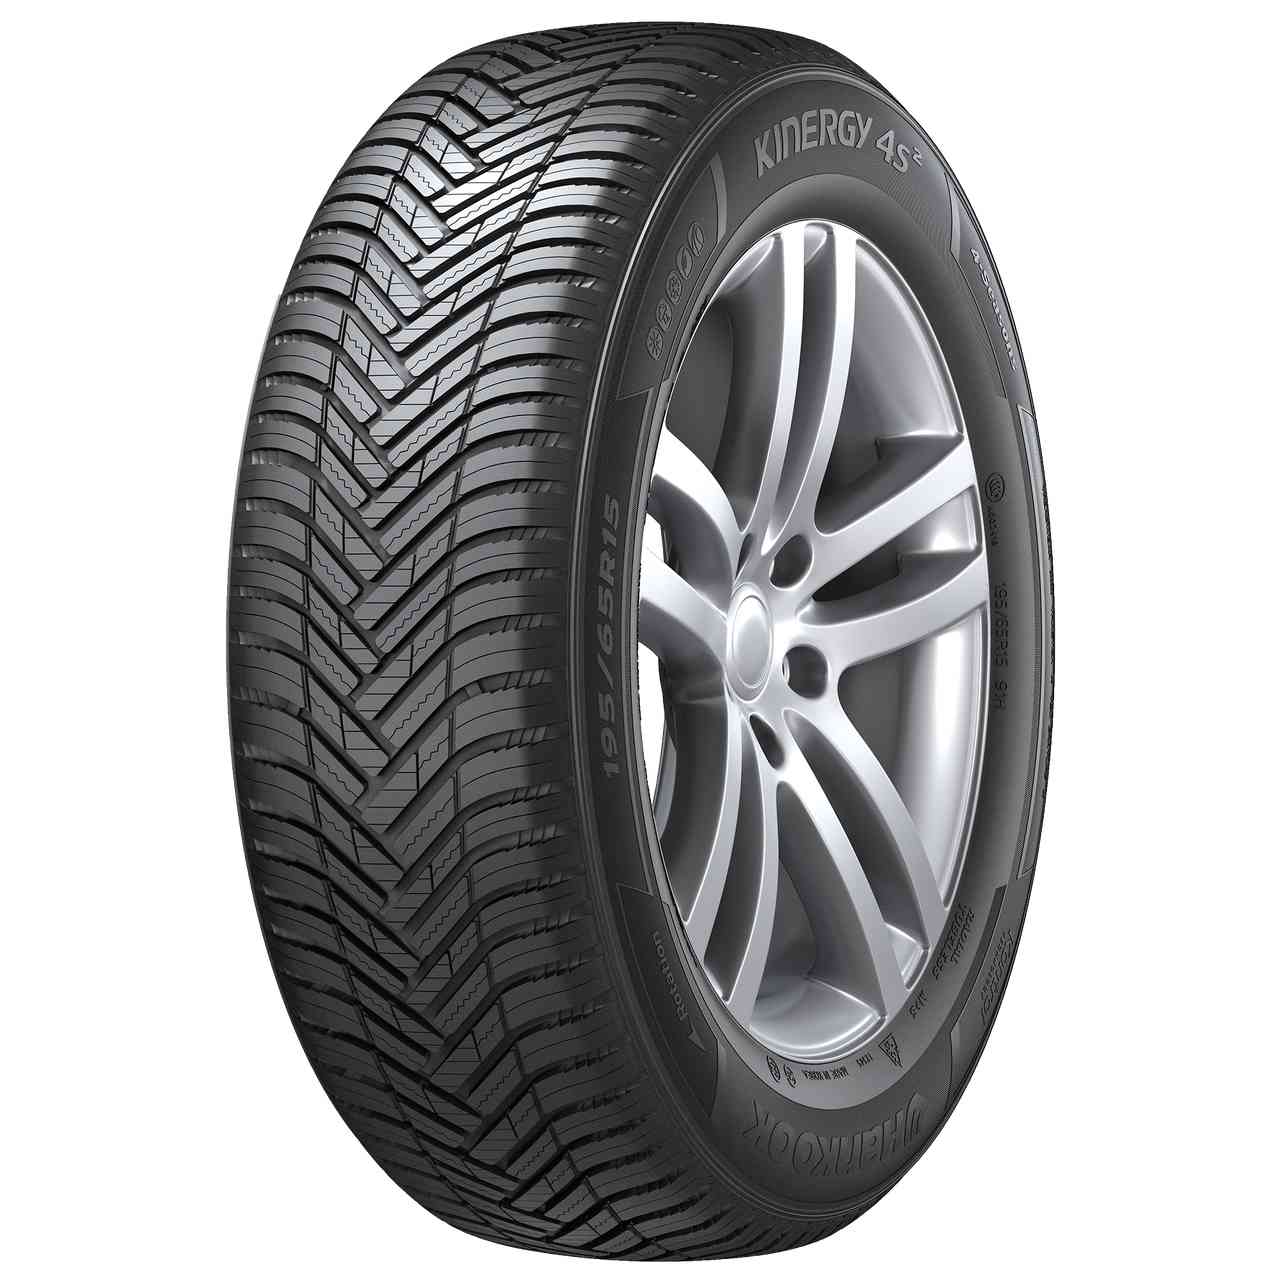 HANKOOK KINERGY 4S 2 (H750) 245/45R19 98W BSW